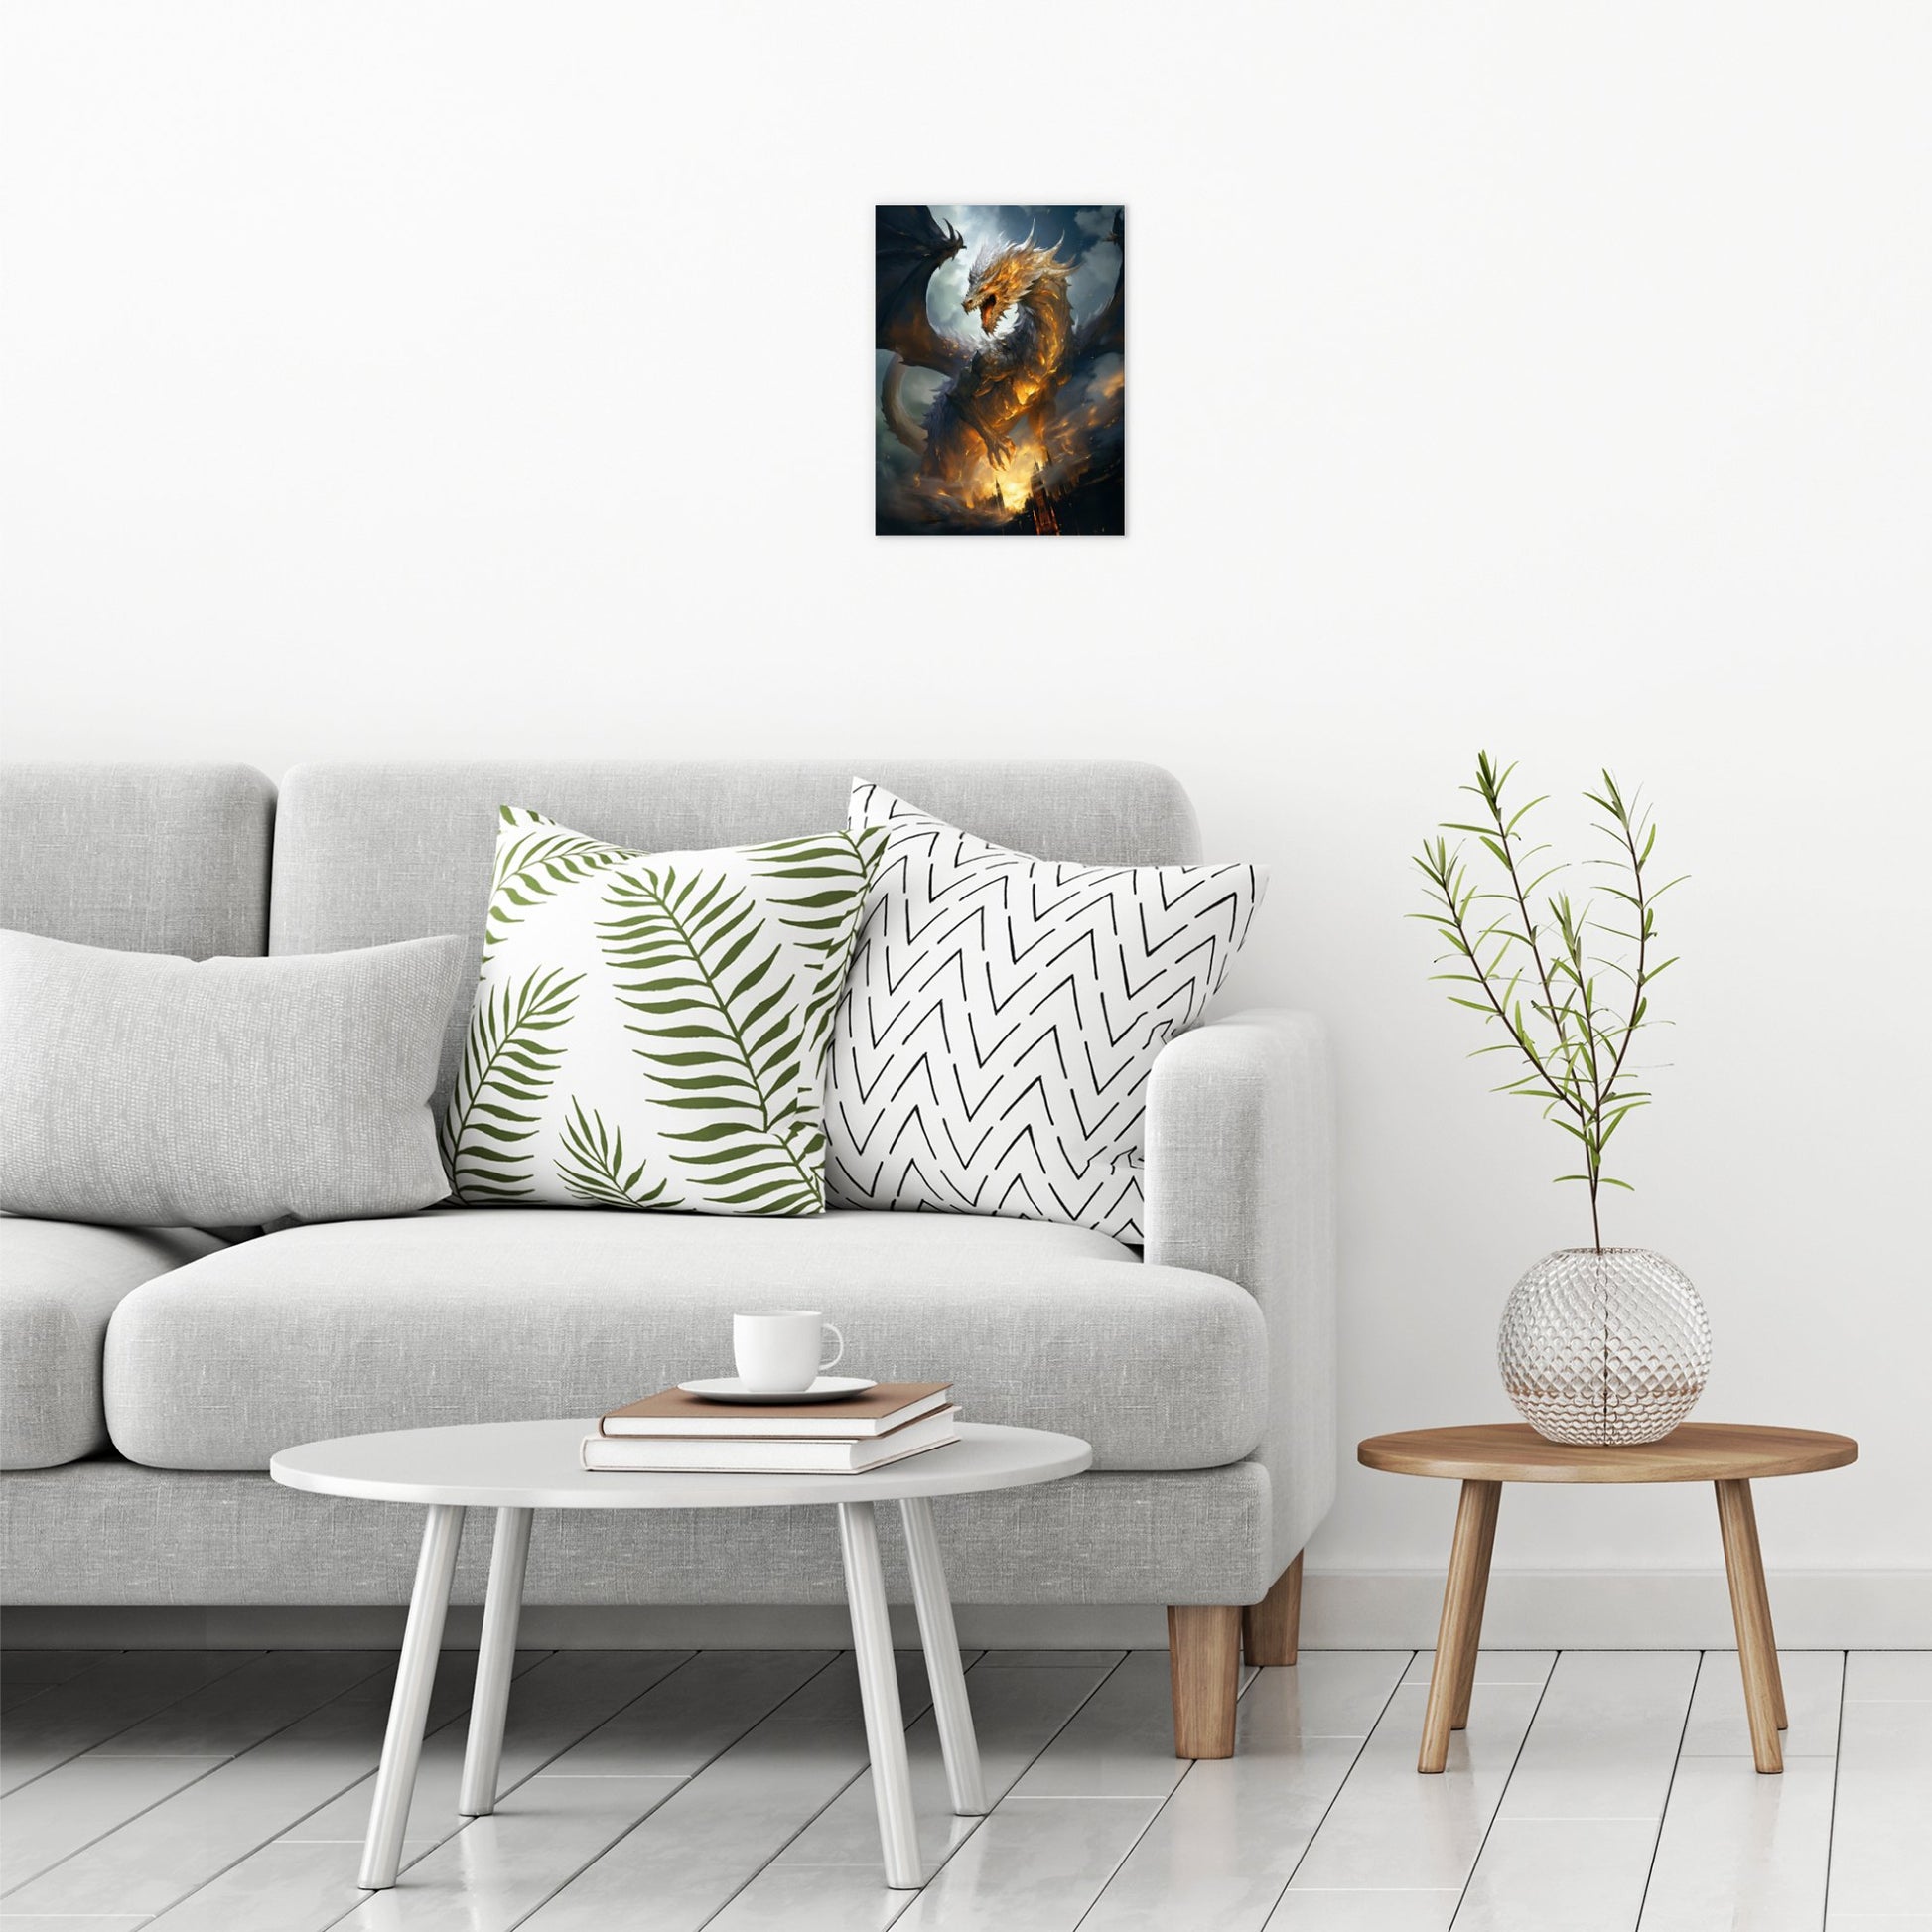 A contemporary modern room view showing a small size metal art poster display plate with printed design of a Golden Dragon Fantasy Painting